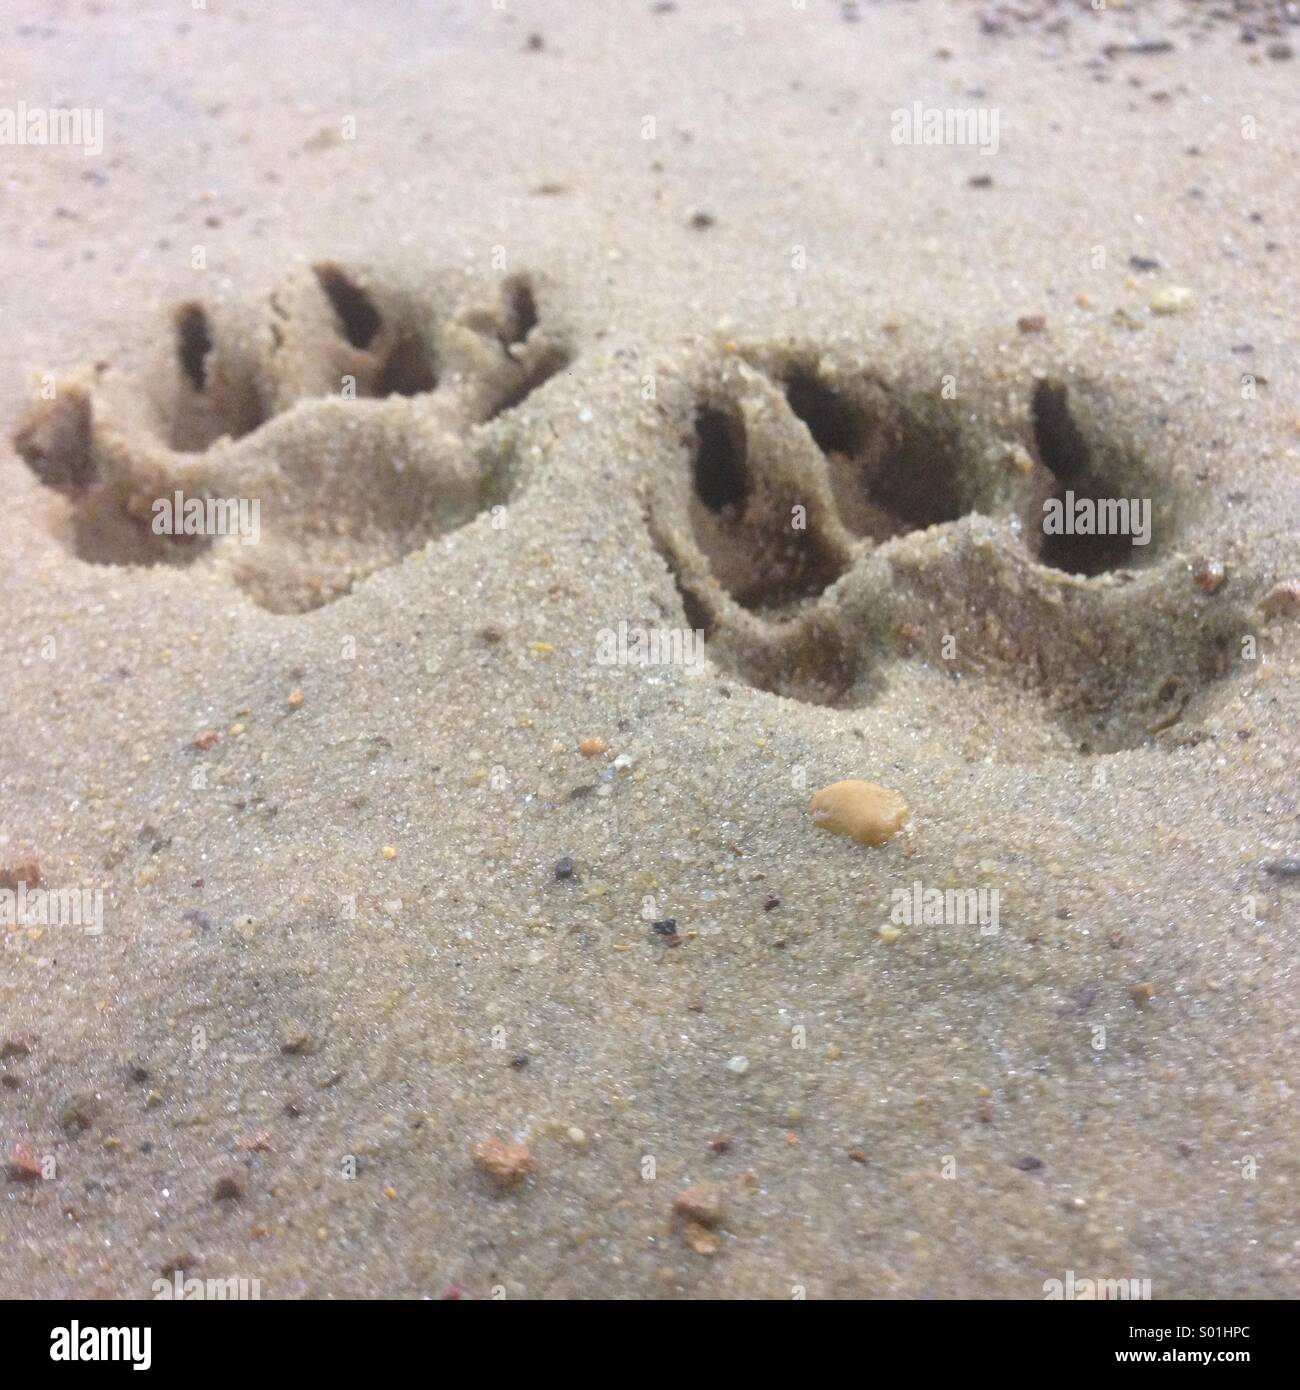 Dog paw prints in the sand. Stock Photo